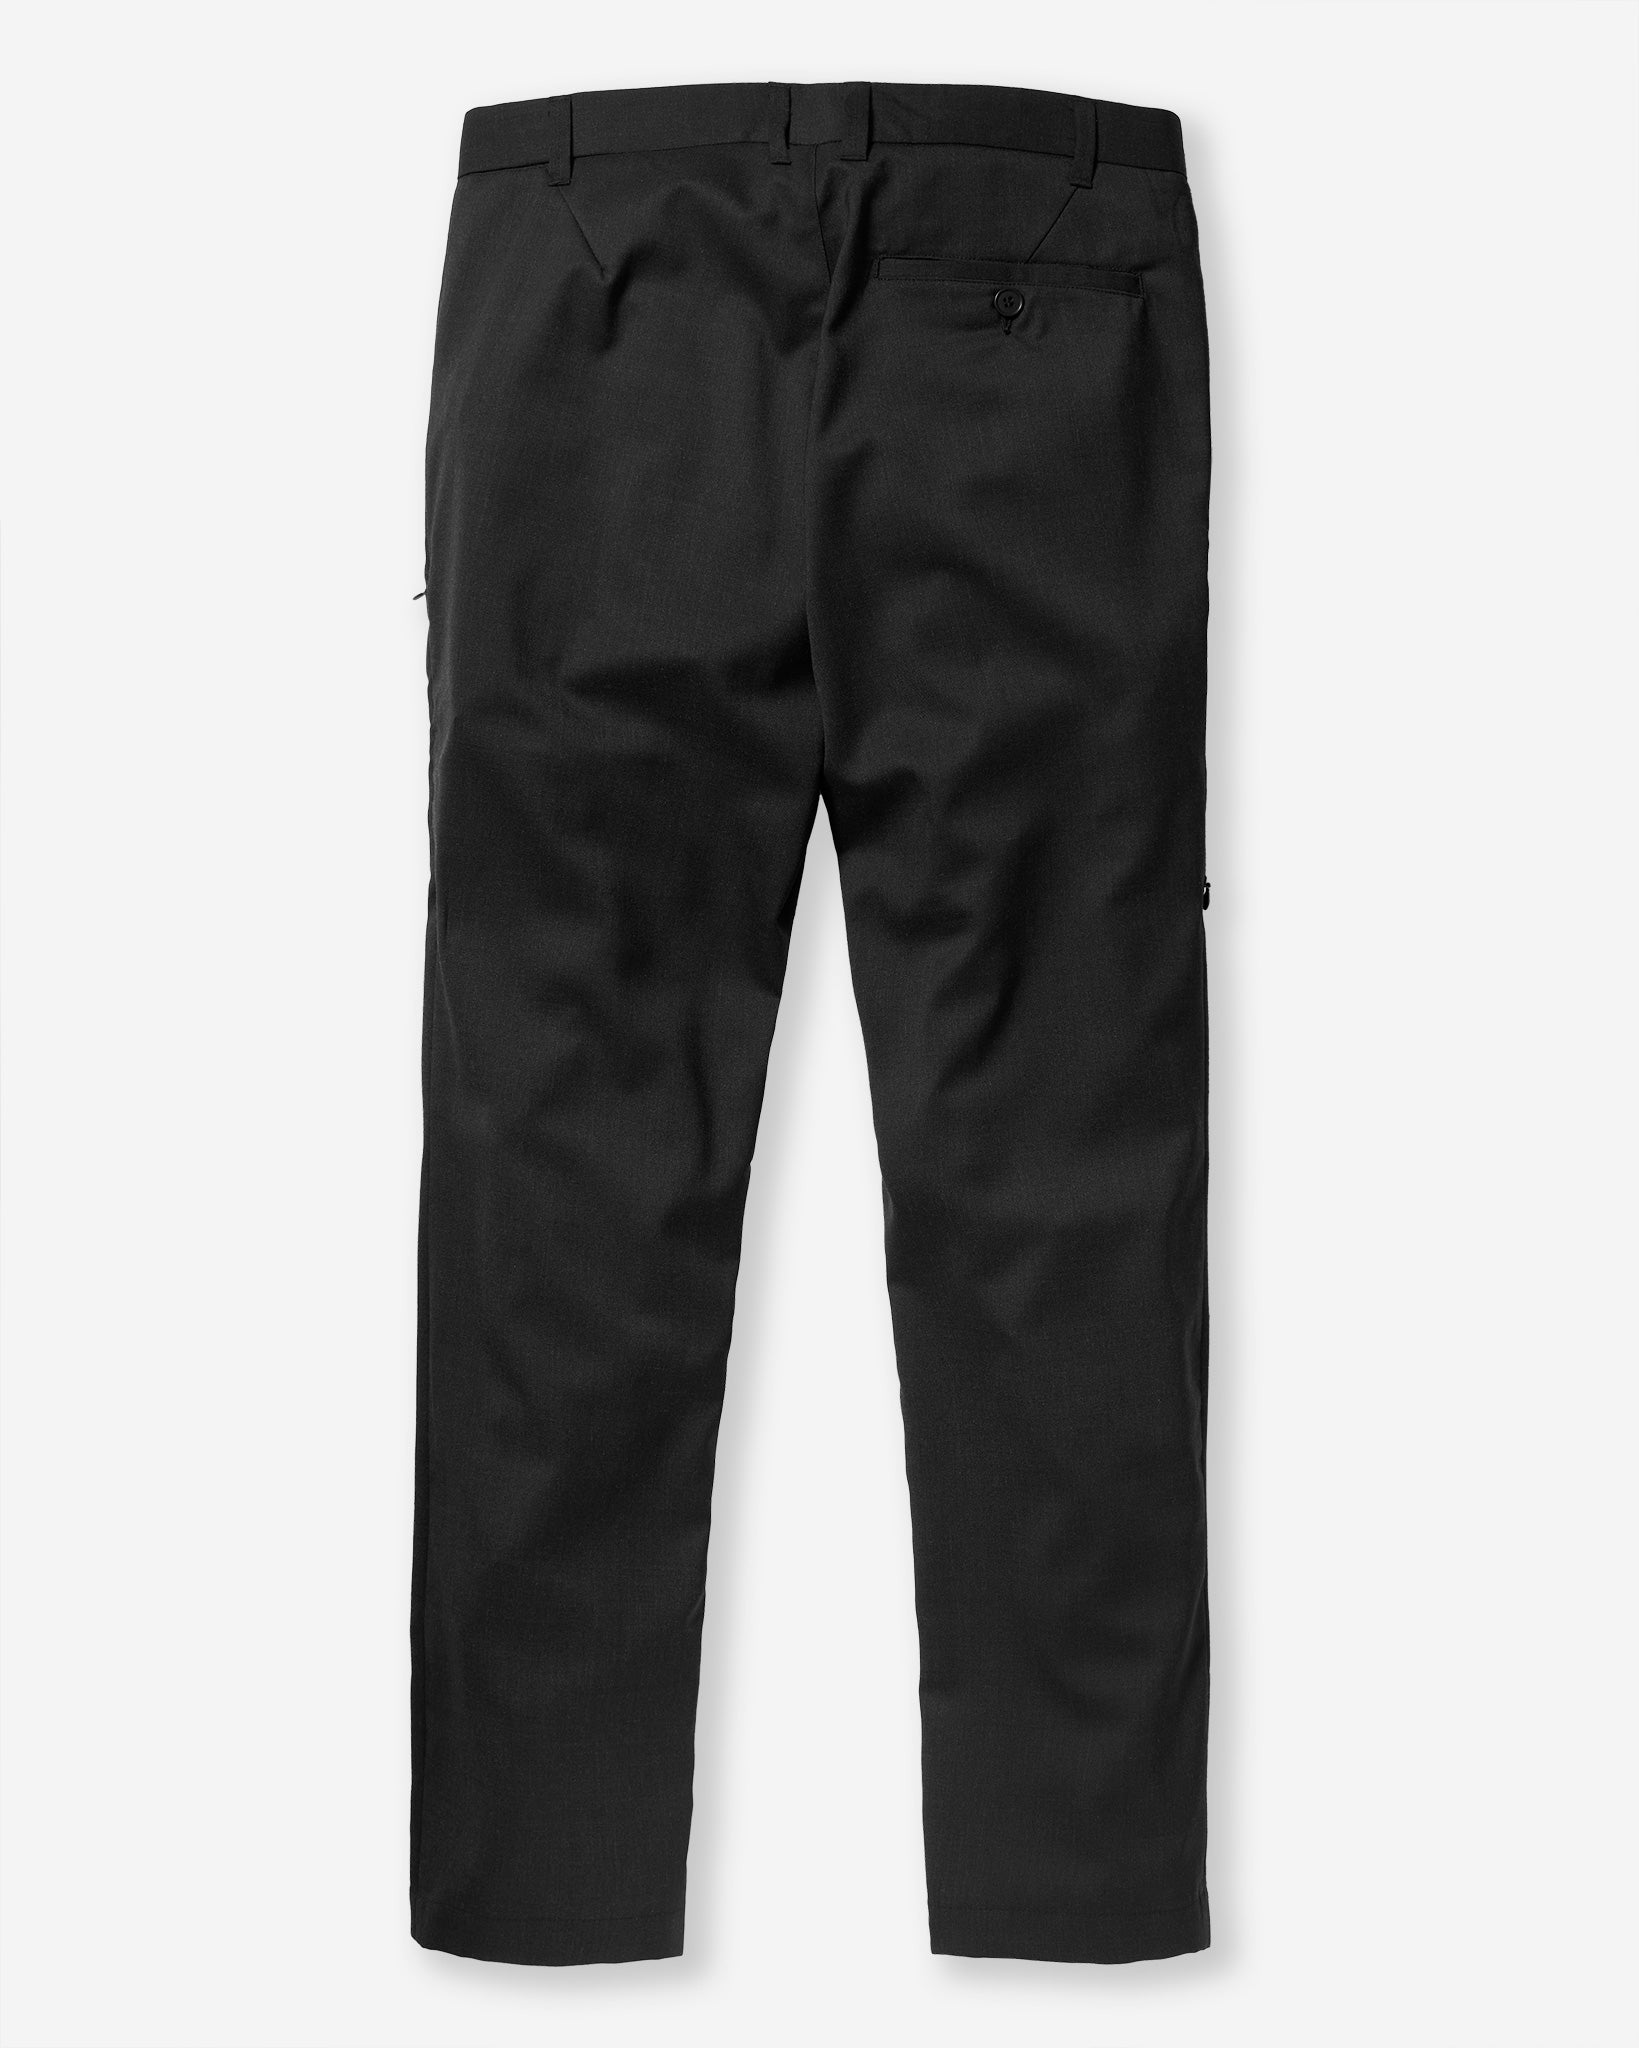 Buy SUPERKICKS RELAXED FIT JOGGERS CARBON BLACK – Superkicks